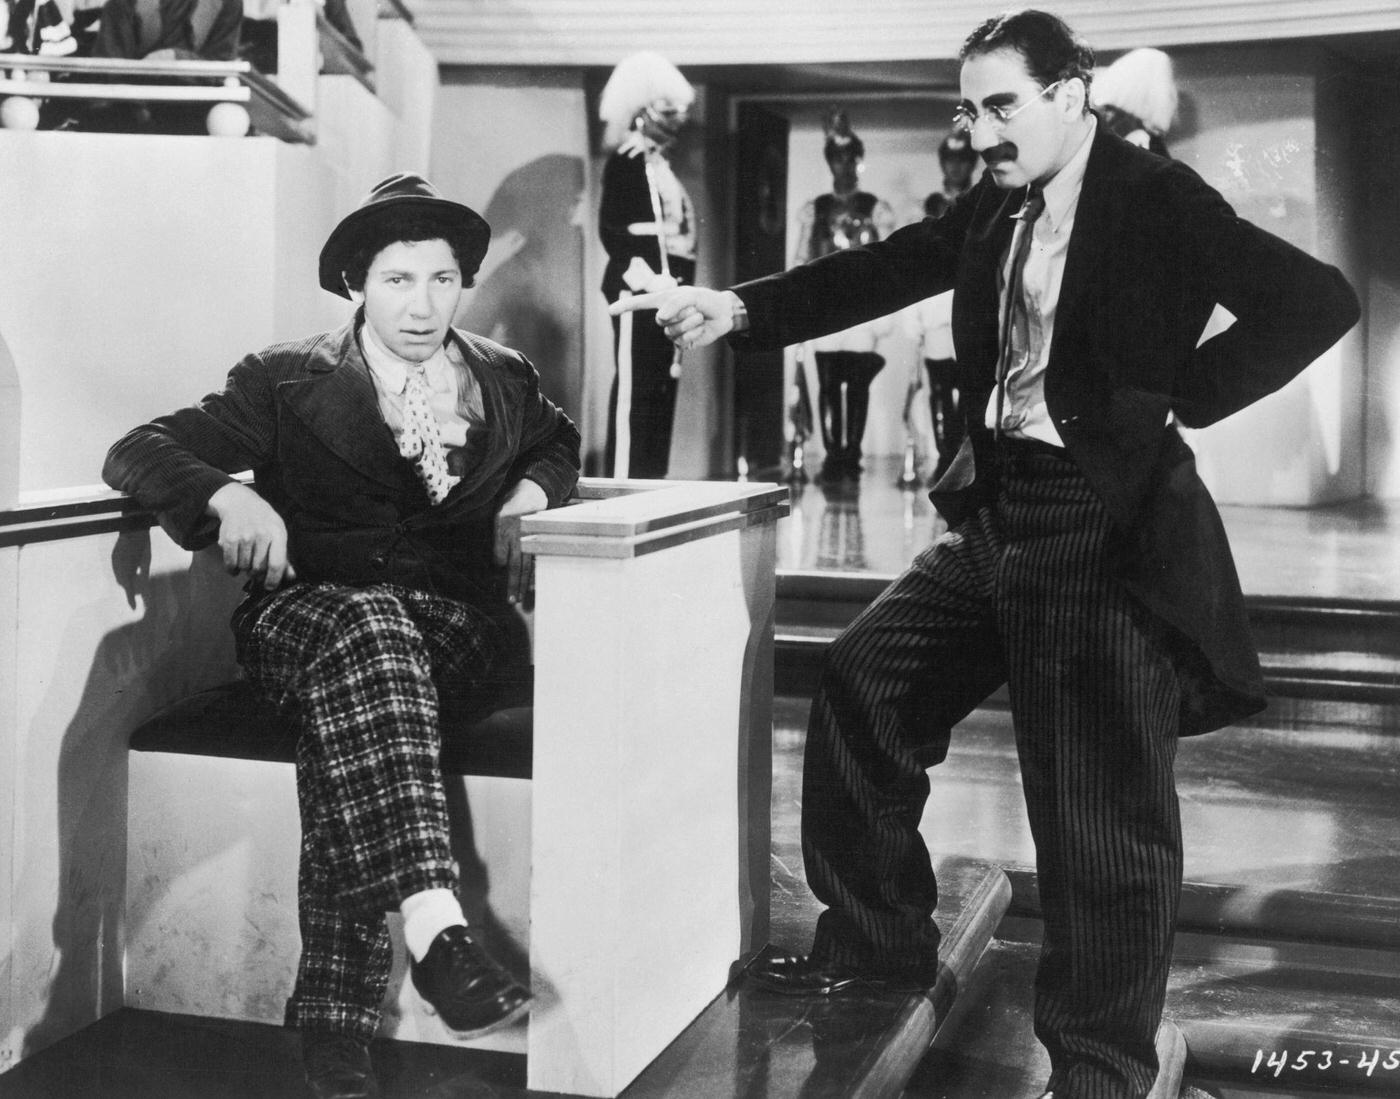 Groucho Marx and Chico Marx as Rufus T. Firefly and Chicolini in Duck Soup (1933).